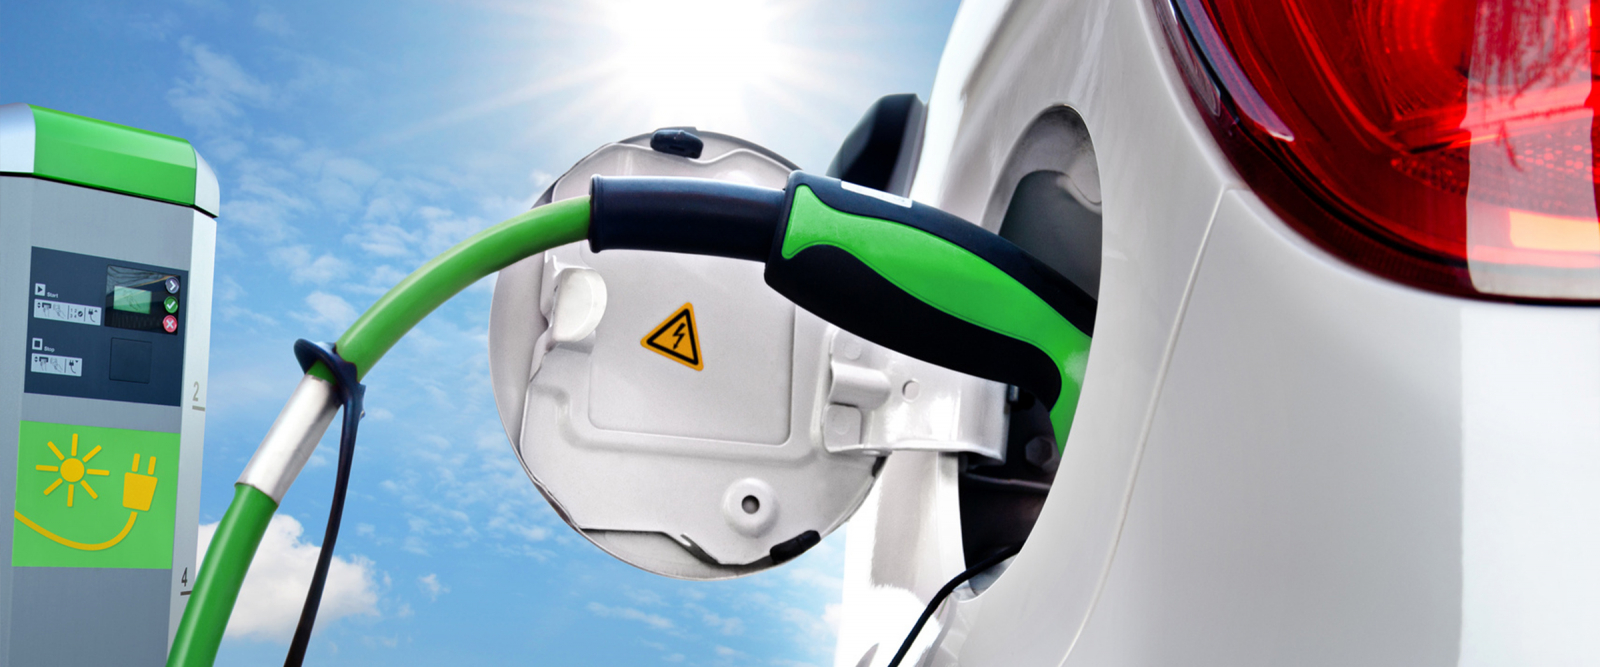 Business plan for electric vehicle charging stations EBP